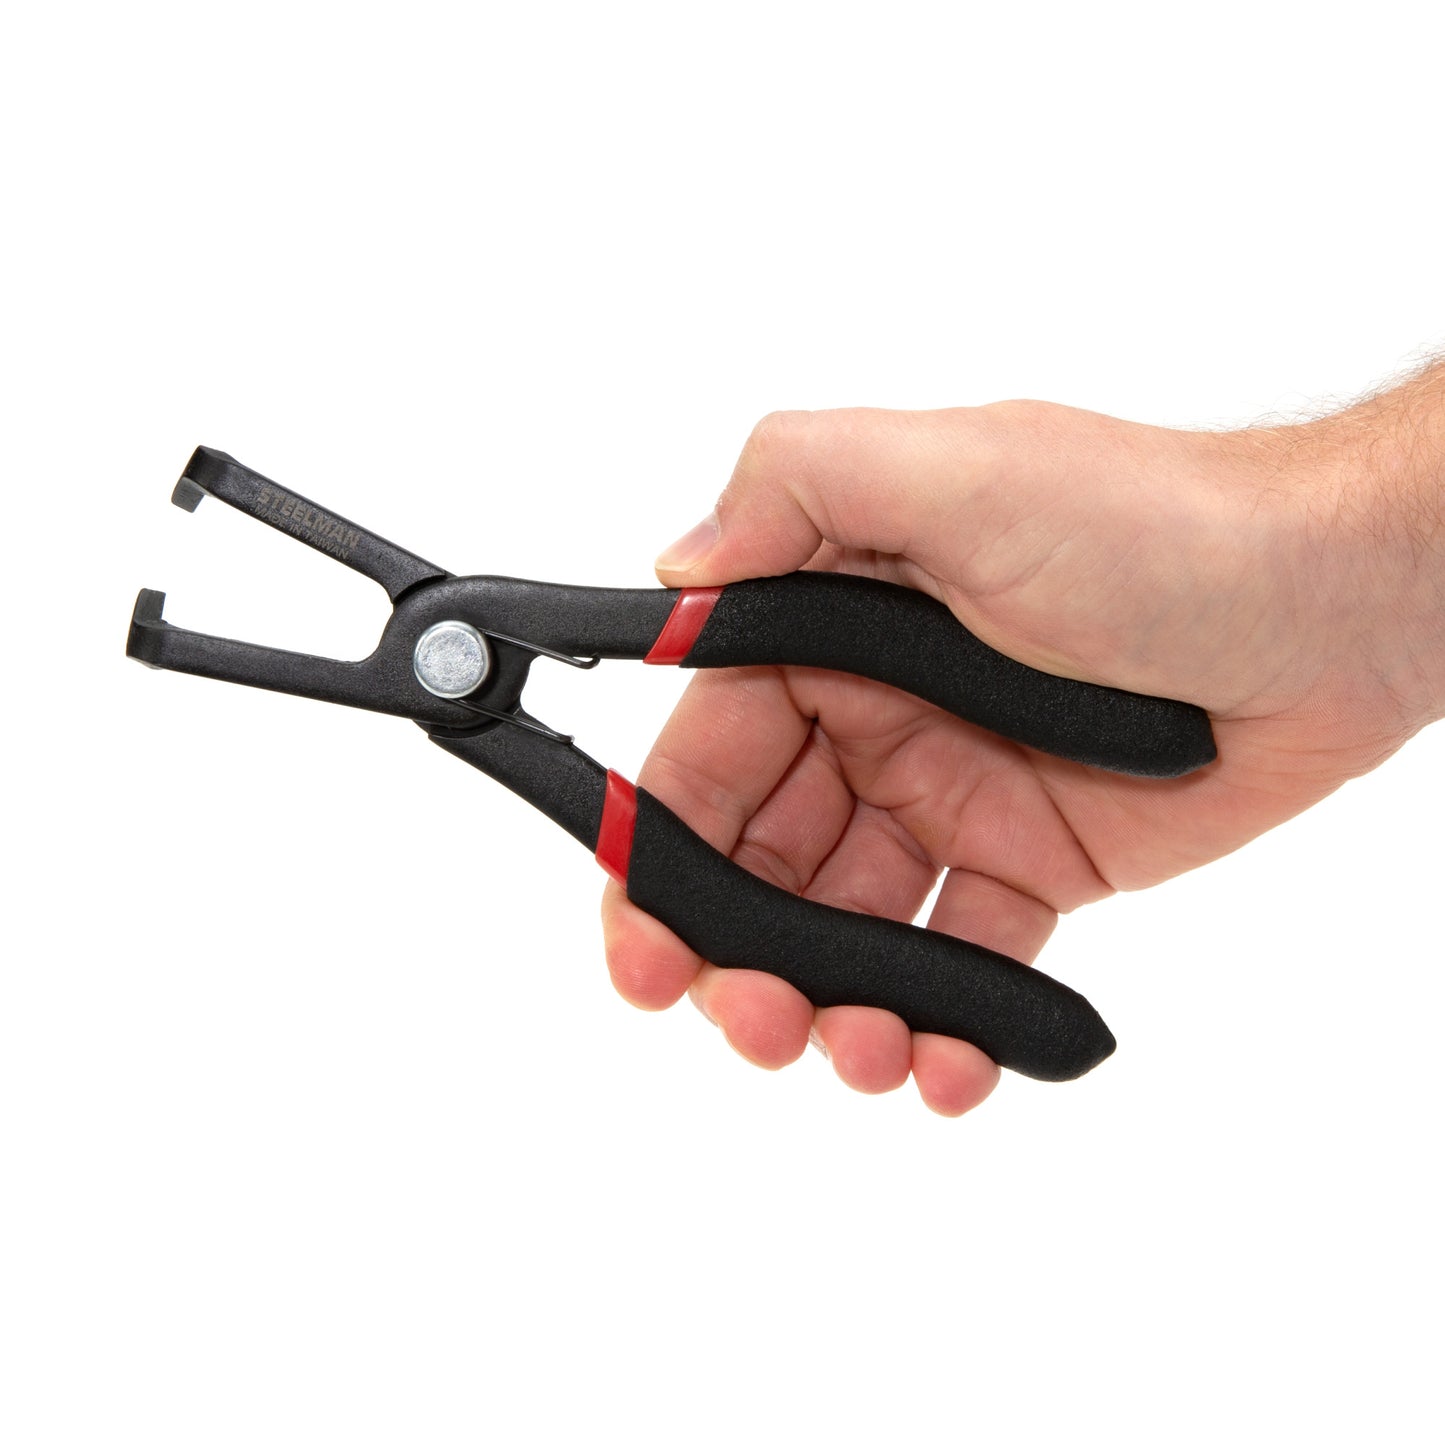 80-Degree Offset Push Pin and Trim Anchor Pliers